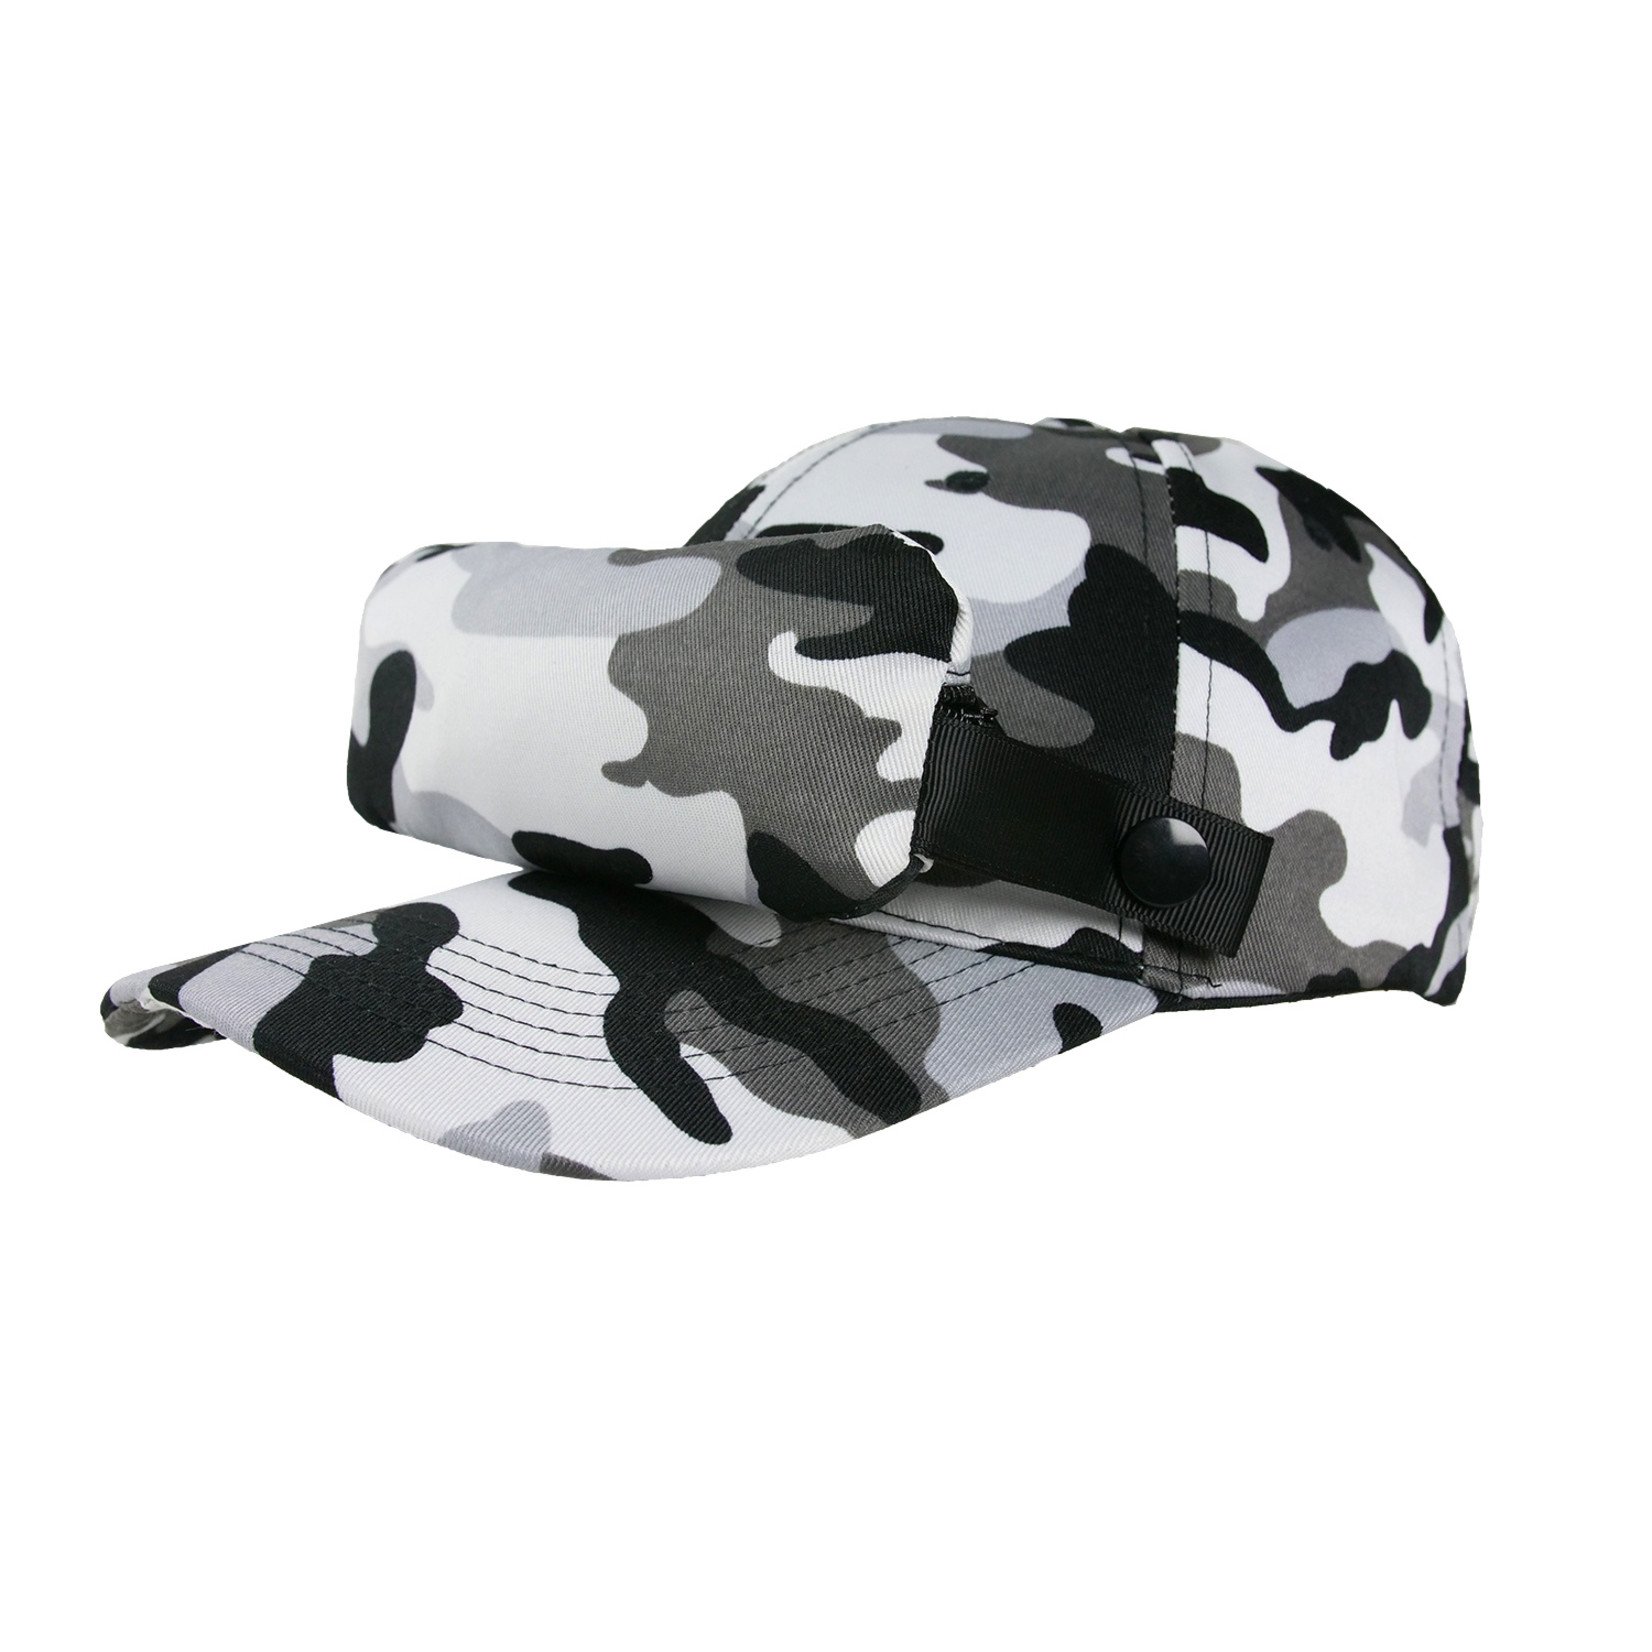 LittleFly Casquette Bug Cap - Camouflage Gris